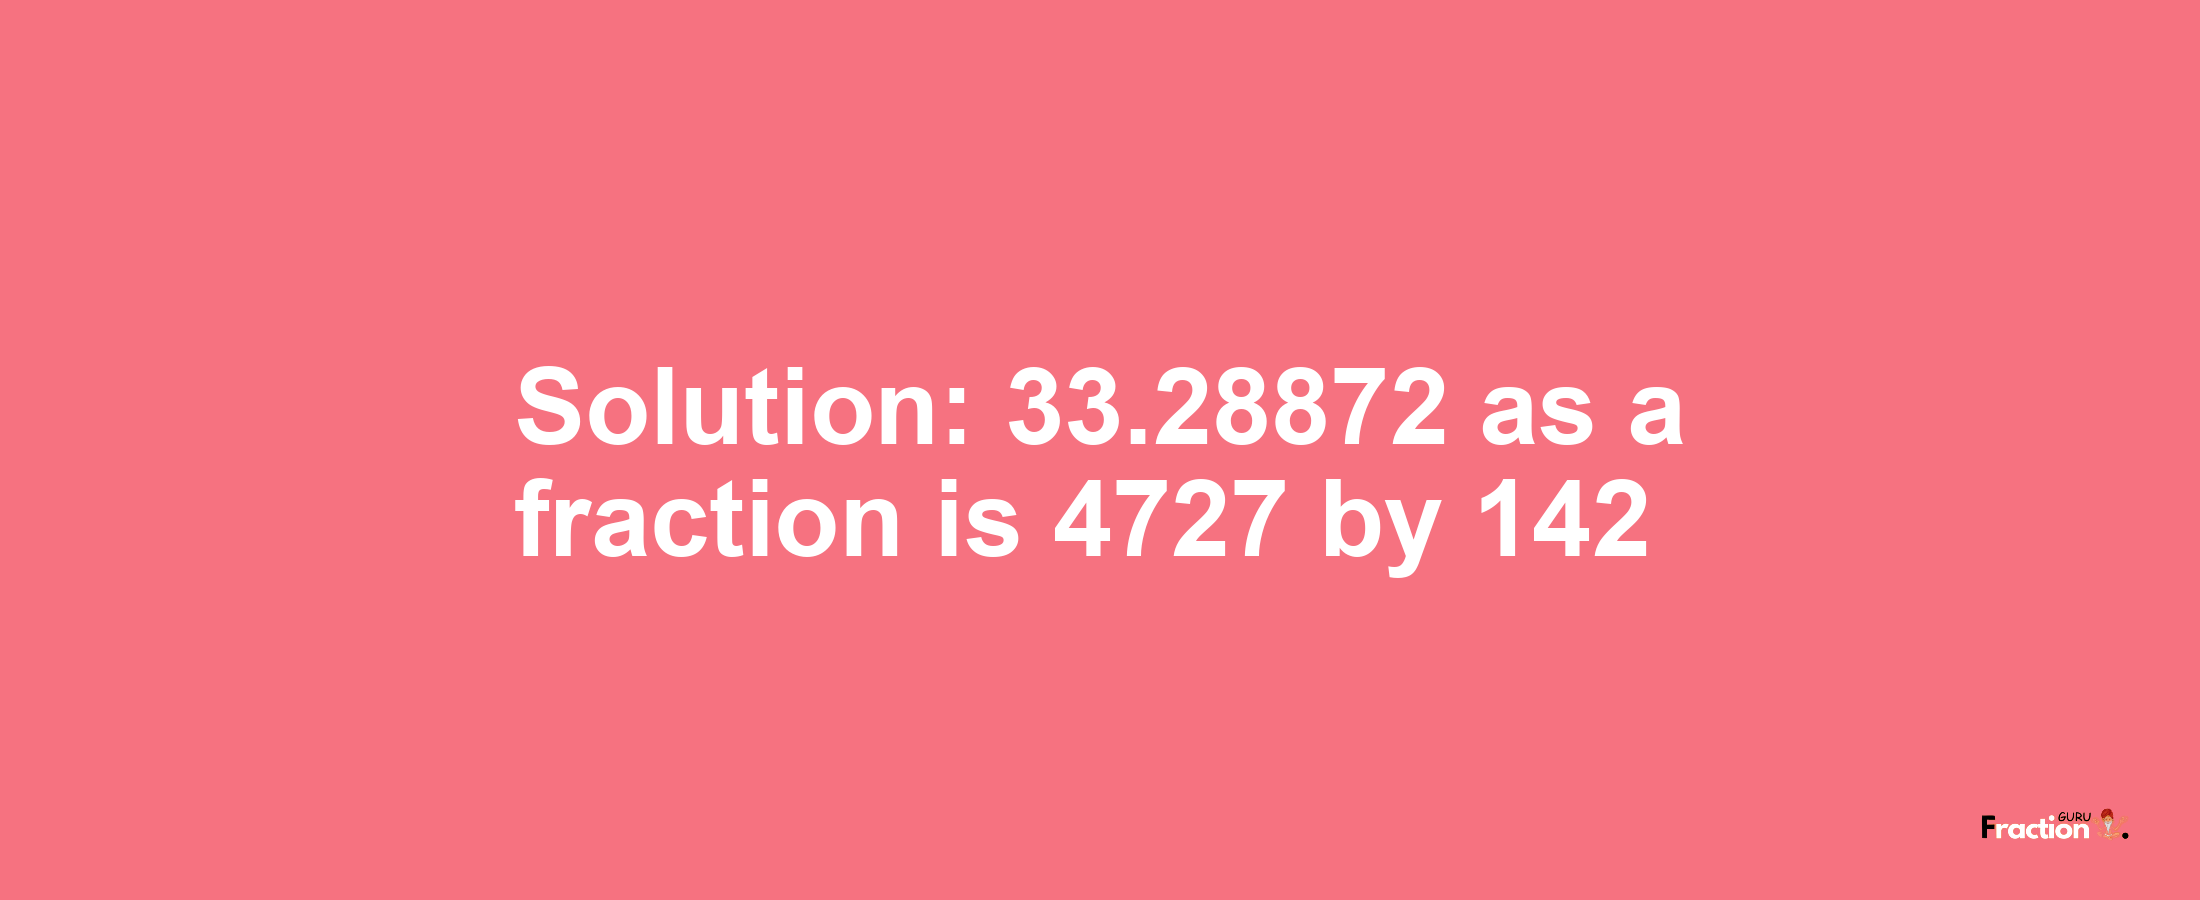 Solution:33.28872 as a fraction is 4727/142